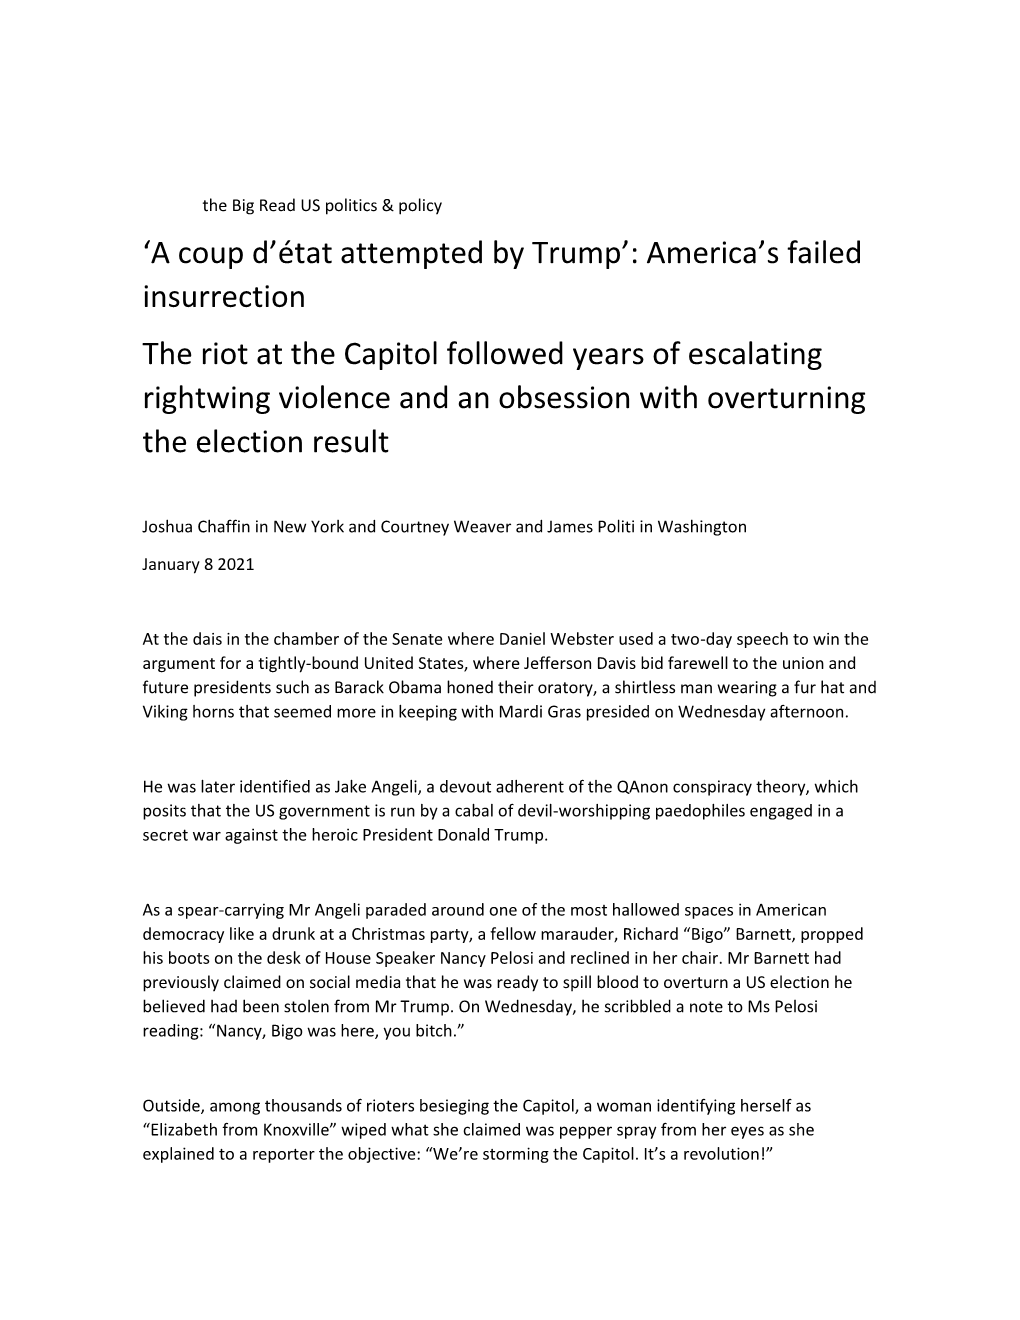 'A Coup D'état Attempted by Trump': America's Failed Insurrection The